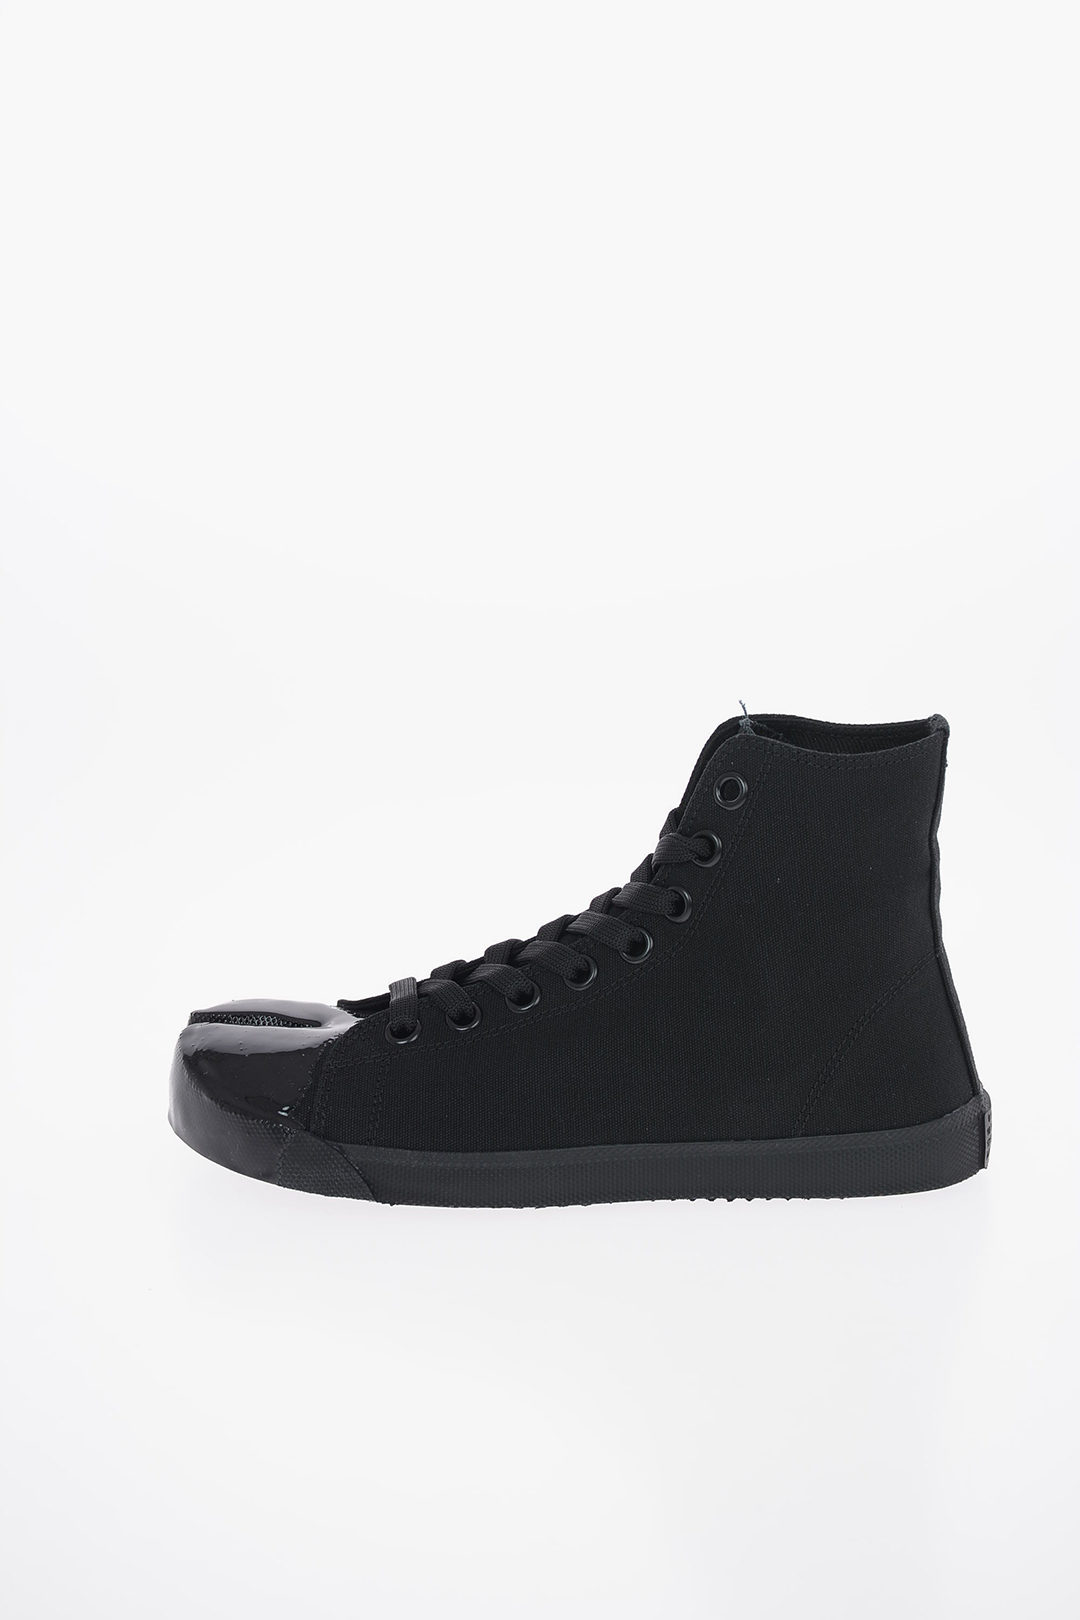 MM22 Canvas TABI High-Top Sneakers with Leather Details